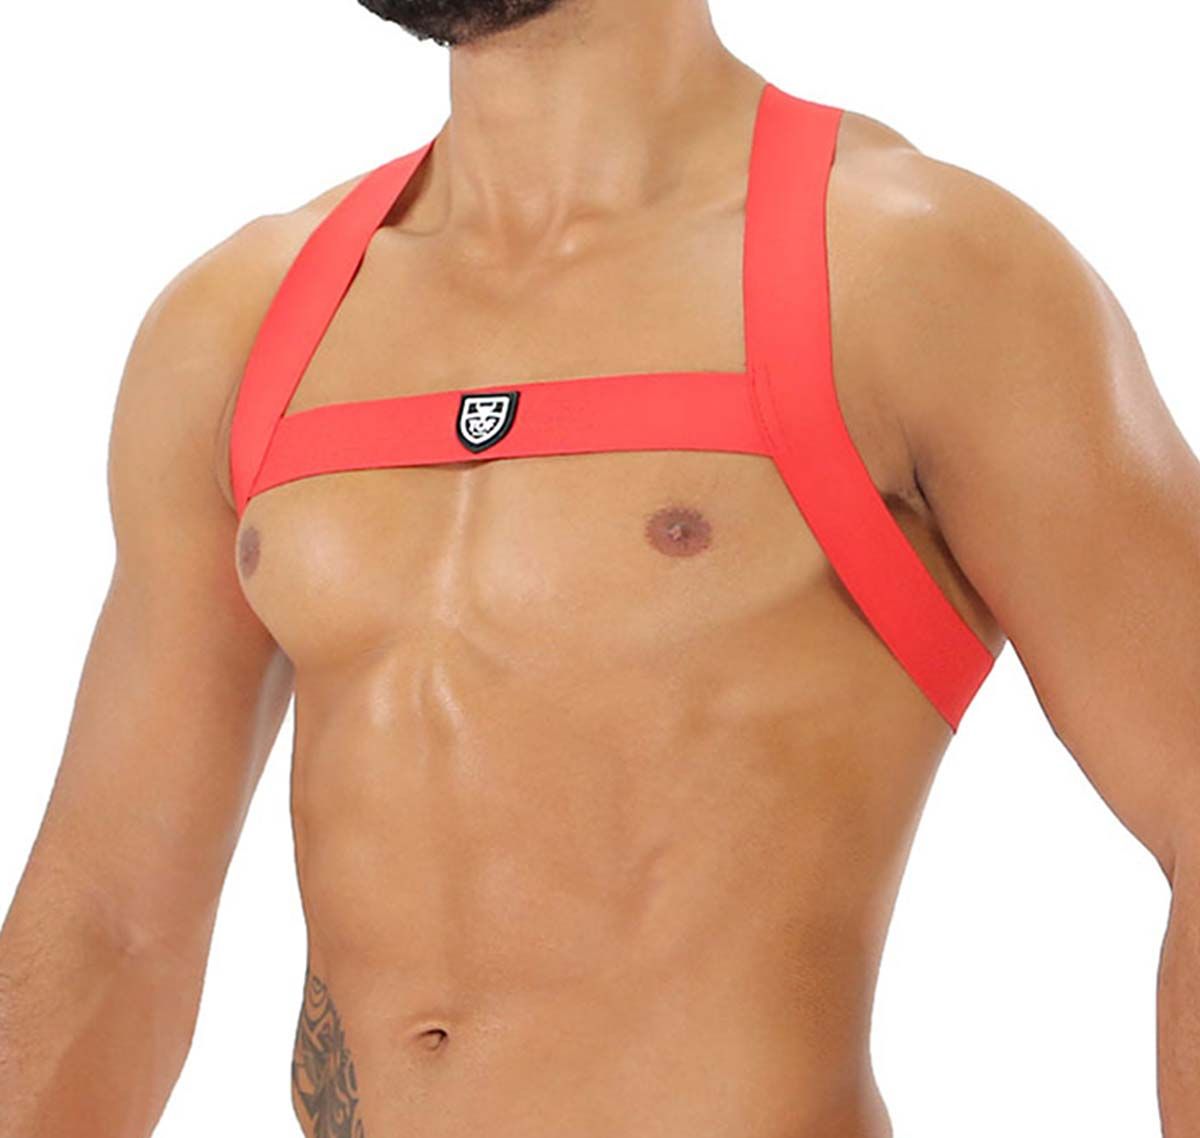 TOF Imbracatura FETISH ELASTIC HARNESS RED H0017R, rosso